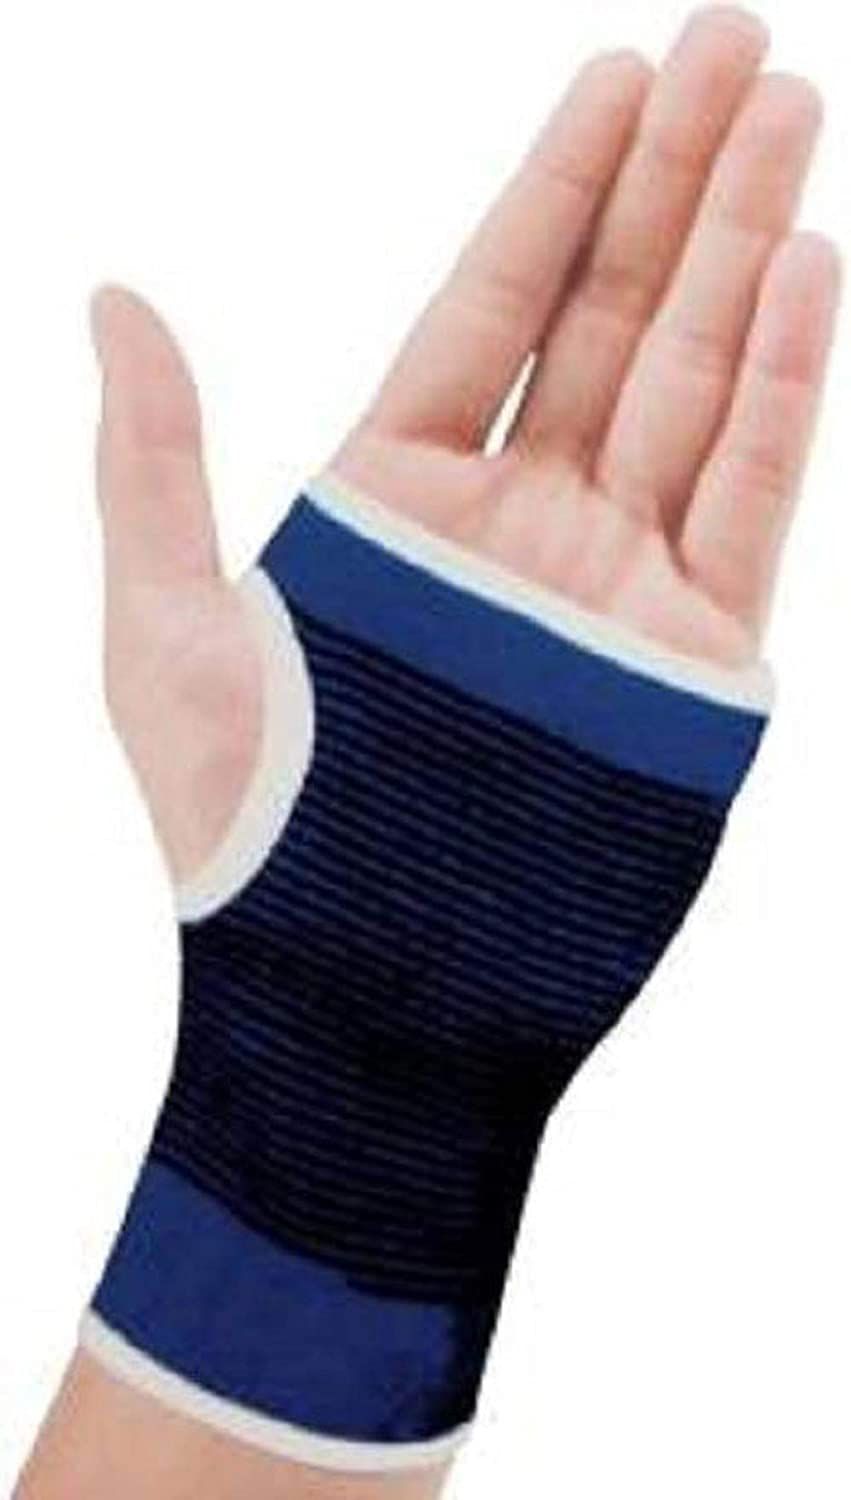 Dust n Shine Blue Palm & Wrist Glove Hand Grip Support Protector Gym for Boys & Girls (Set of 1 Pair)